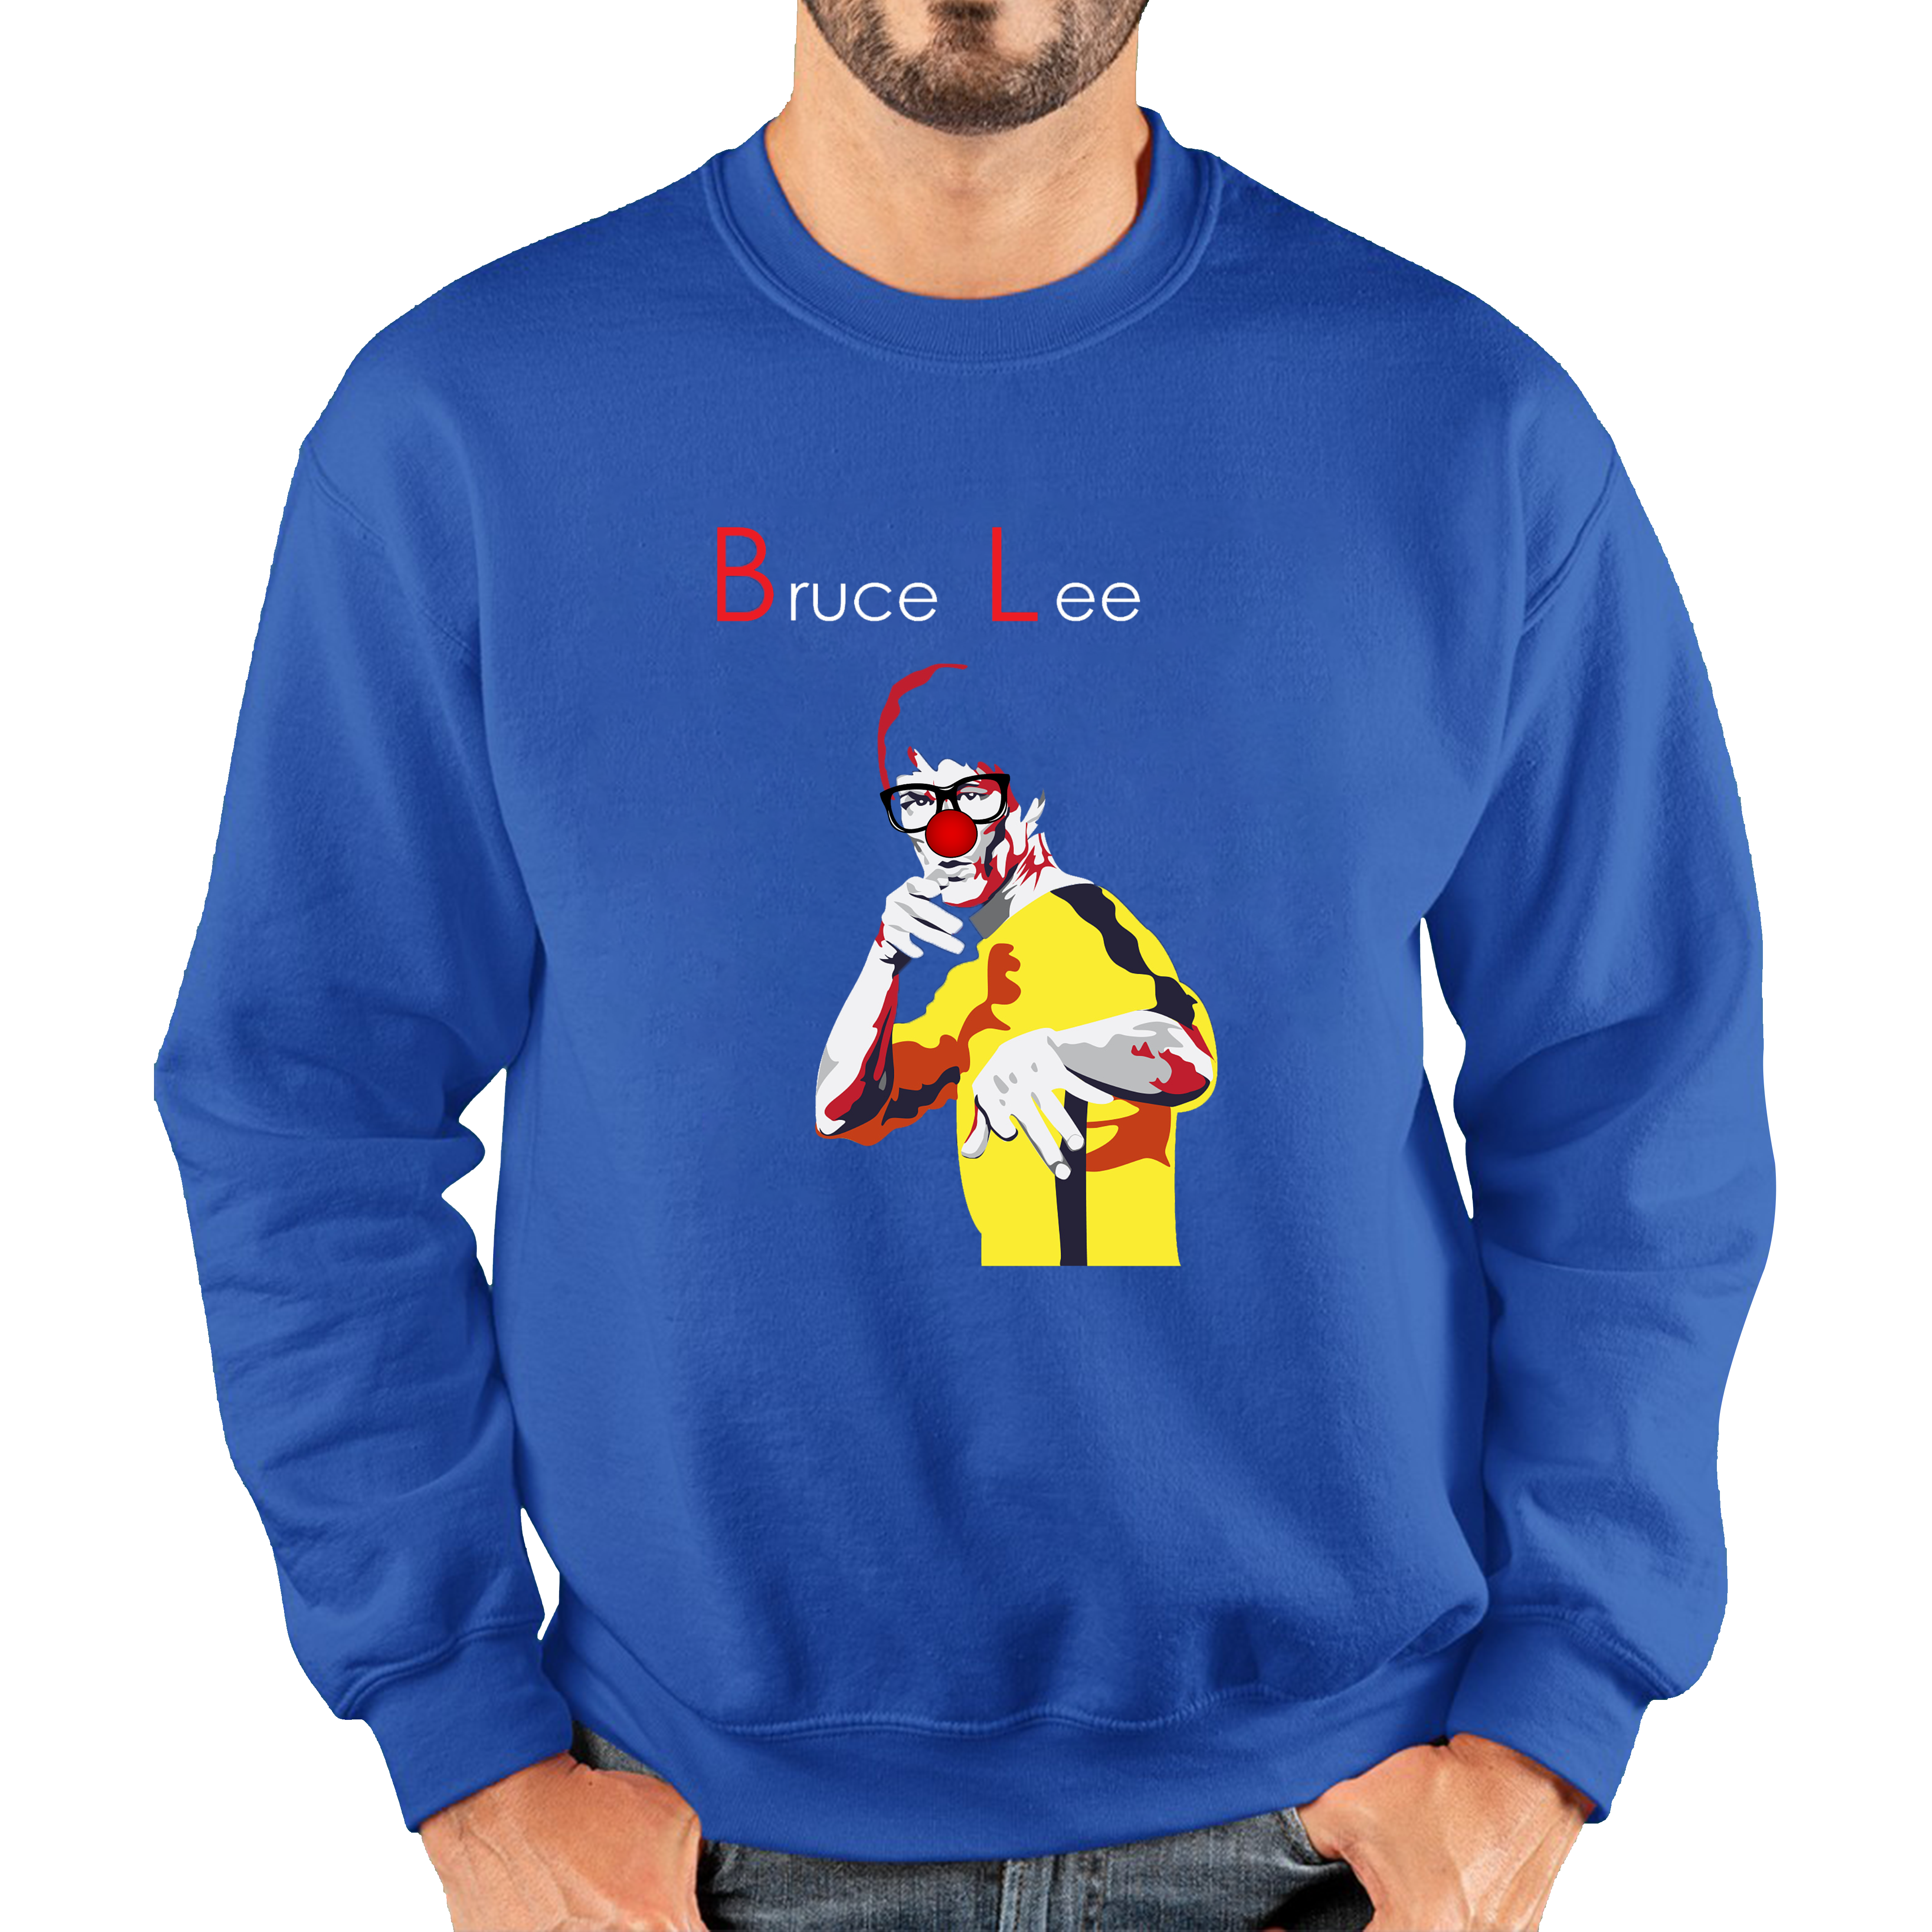 Bruce Lee Red Nose Day Adult Sweatshirt. 50% Goes To Charity